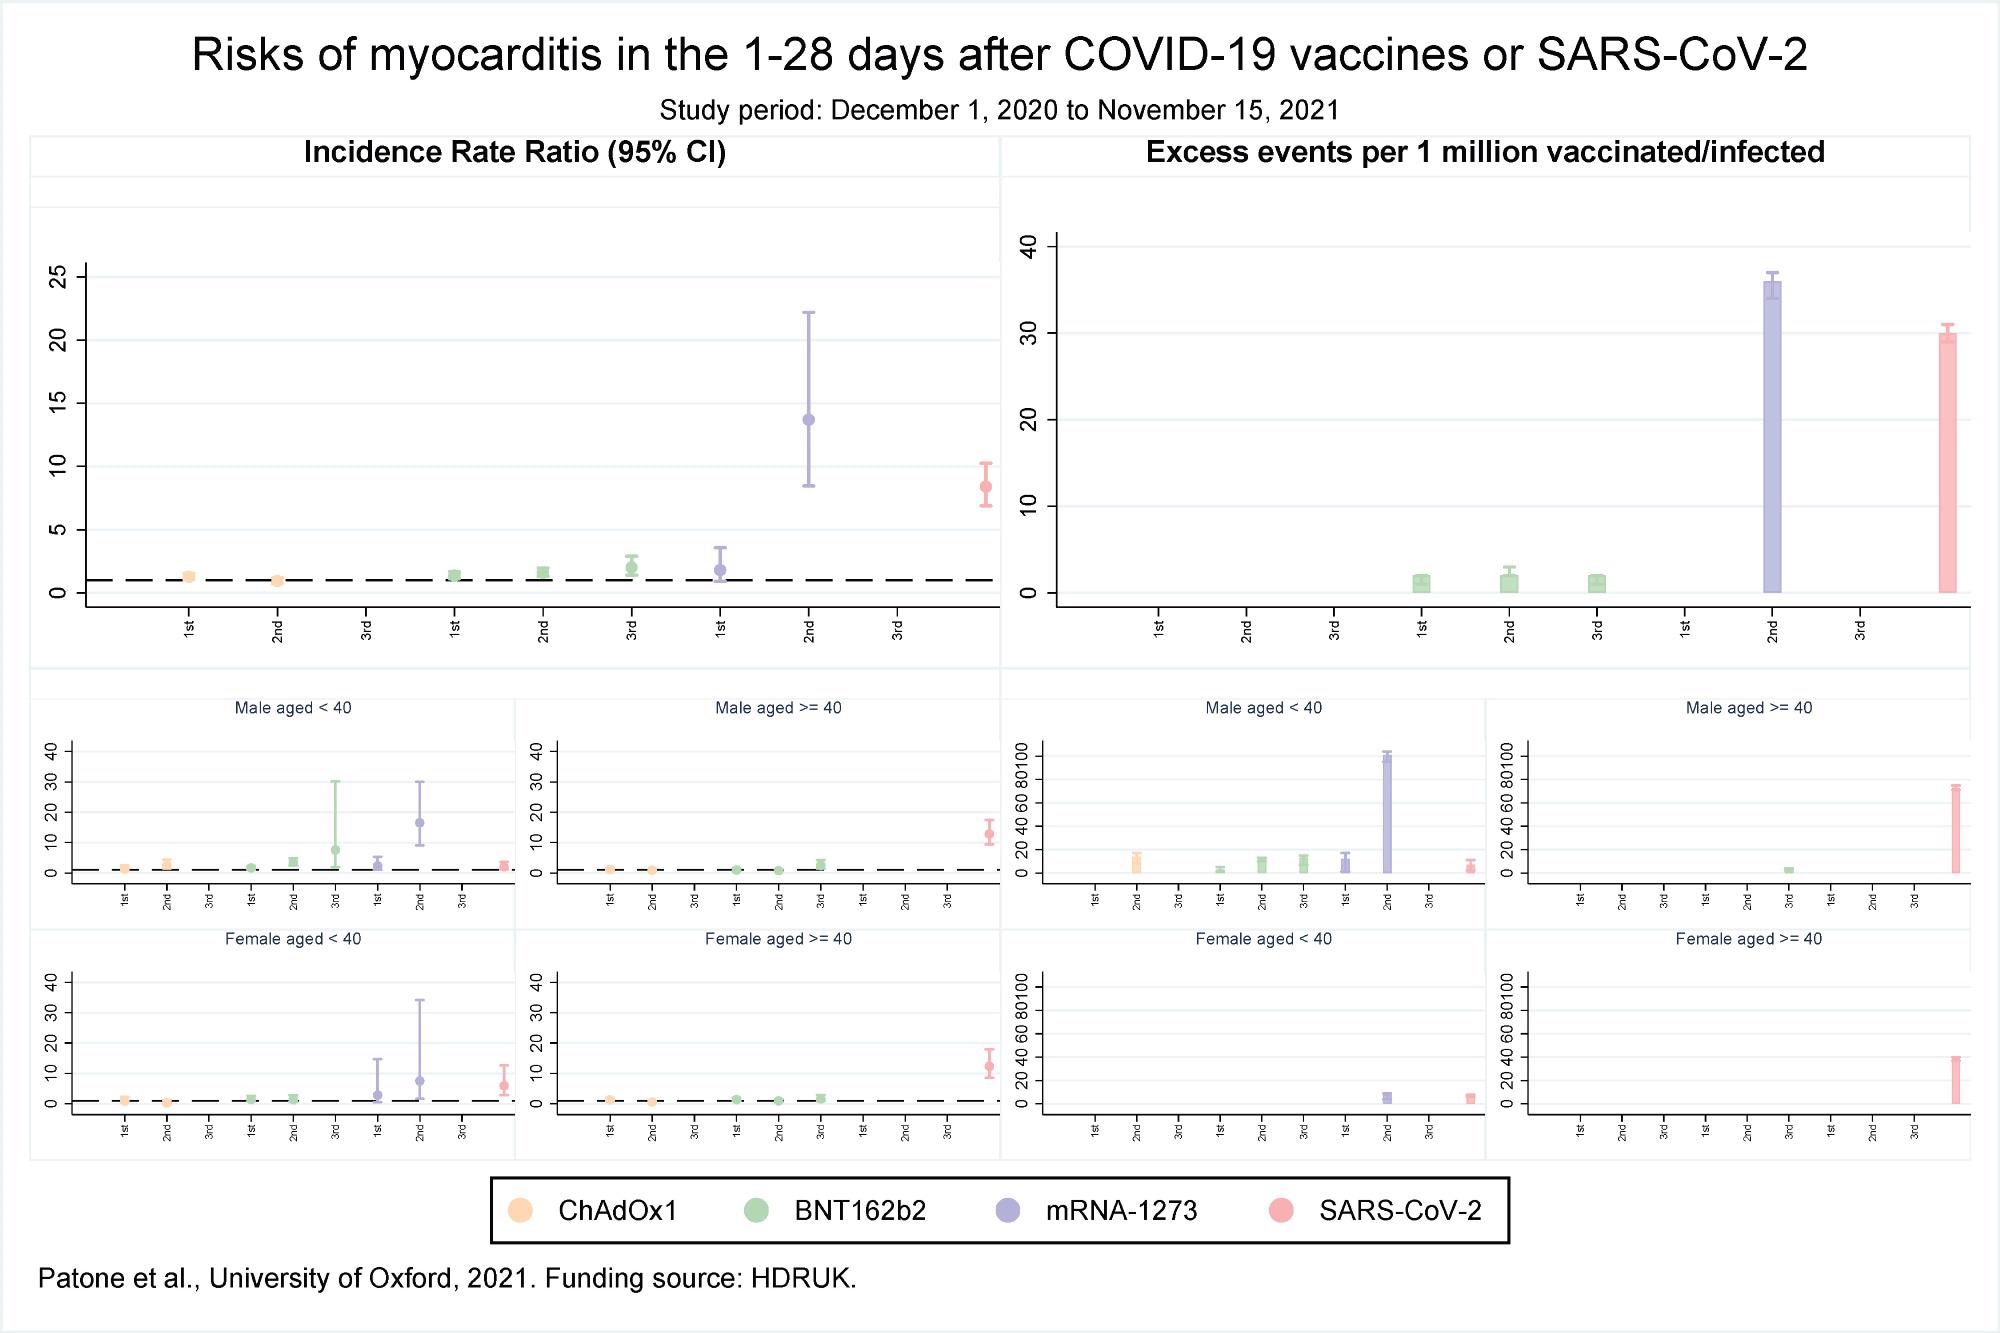 Risks of myocarditis in the 1-28 days after COVID-19 vaccines or SARS-CoV-2